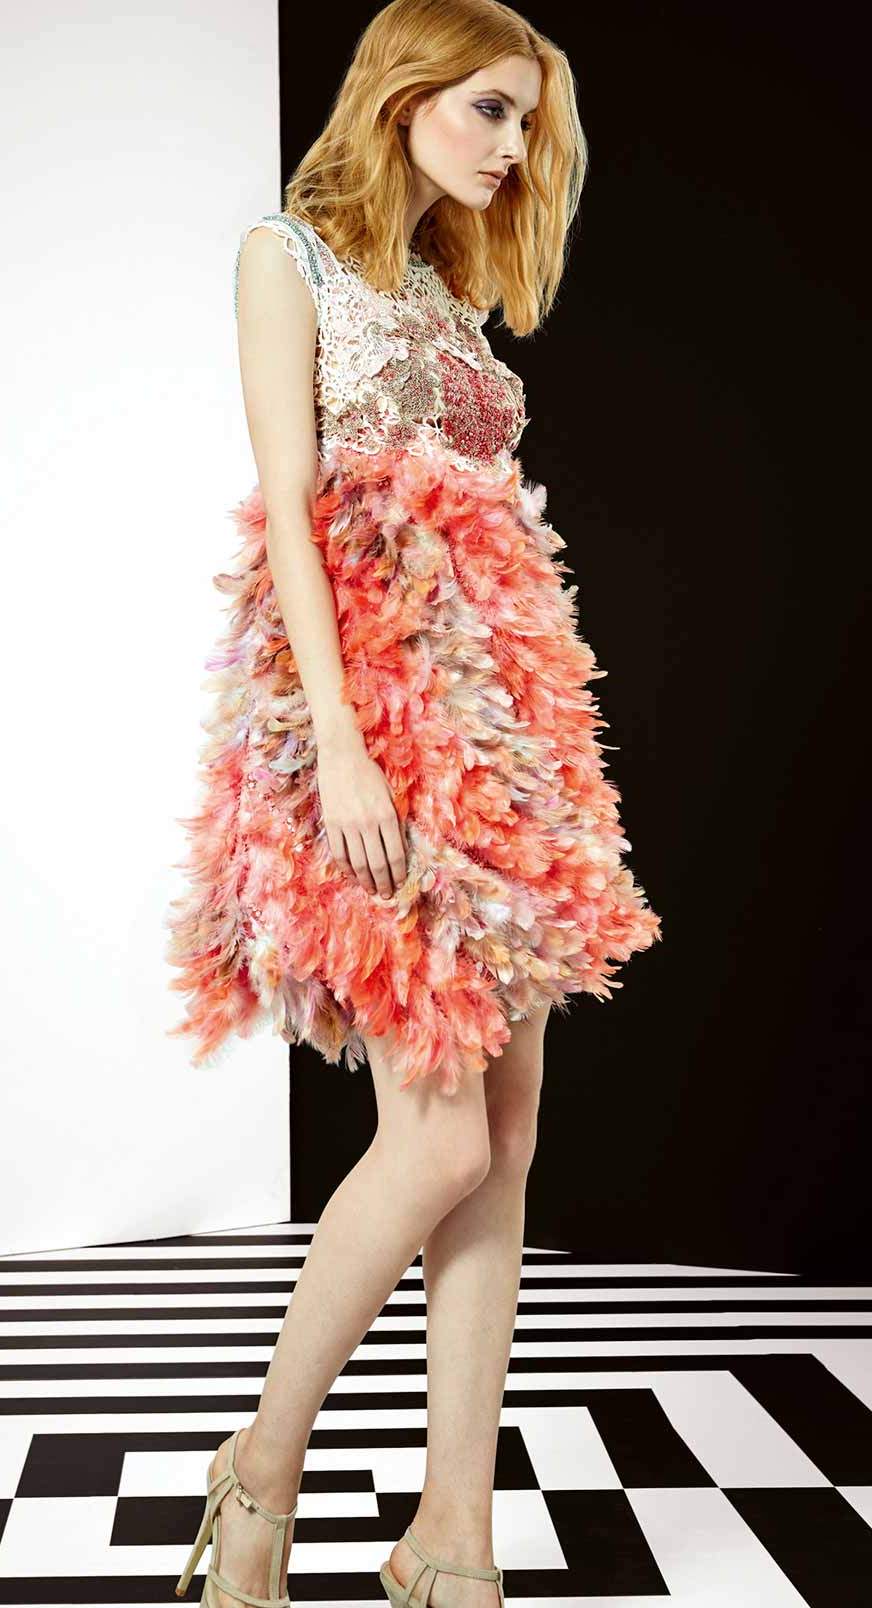 Short pink couture dress made by an overlapping silks and fine rinhestones fabrics